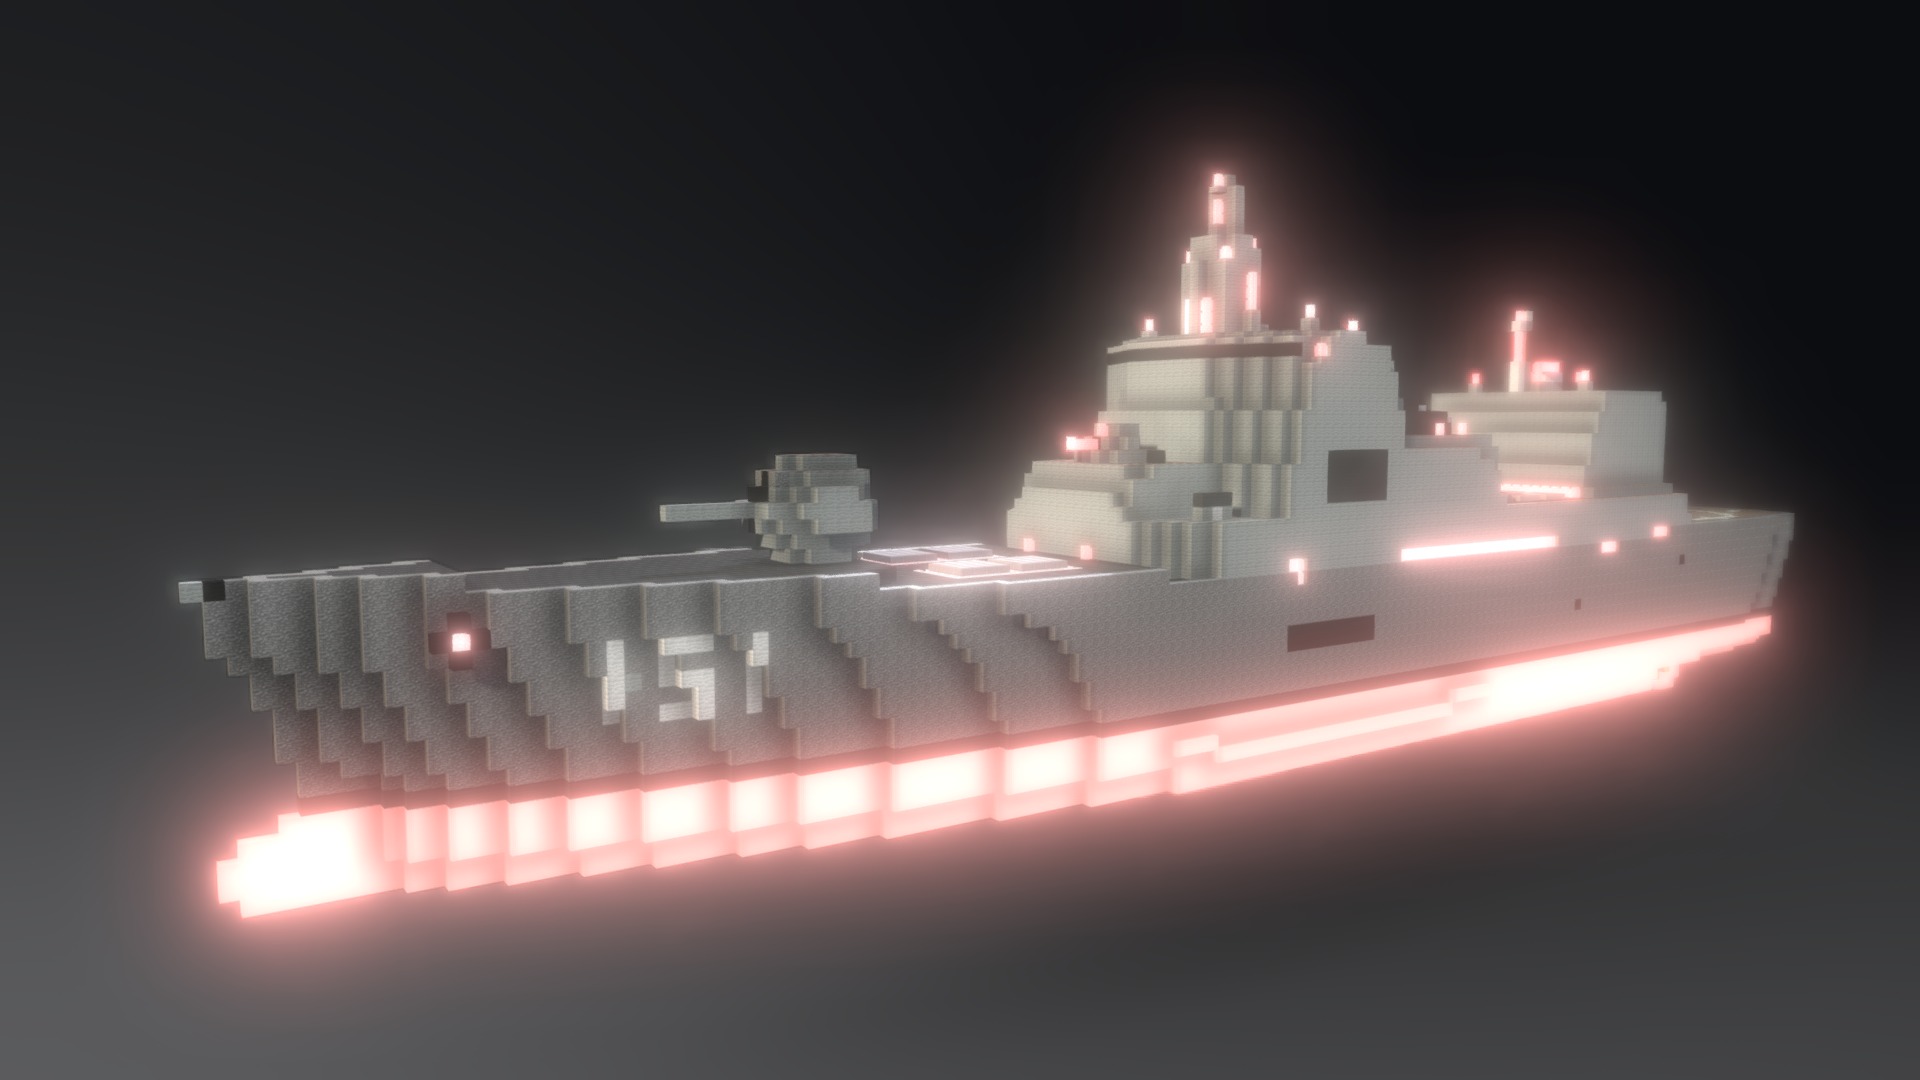 3D model 055 Cruiser / 巡洋艦 - This is a 3D model of the 055 Cruiser / 巡洋艦. The 3D model is about a large white ship with red lights.